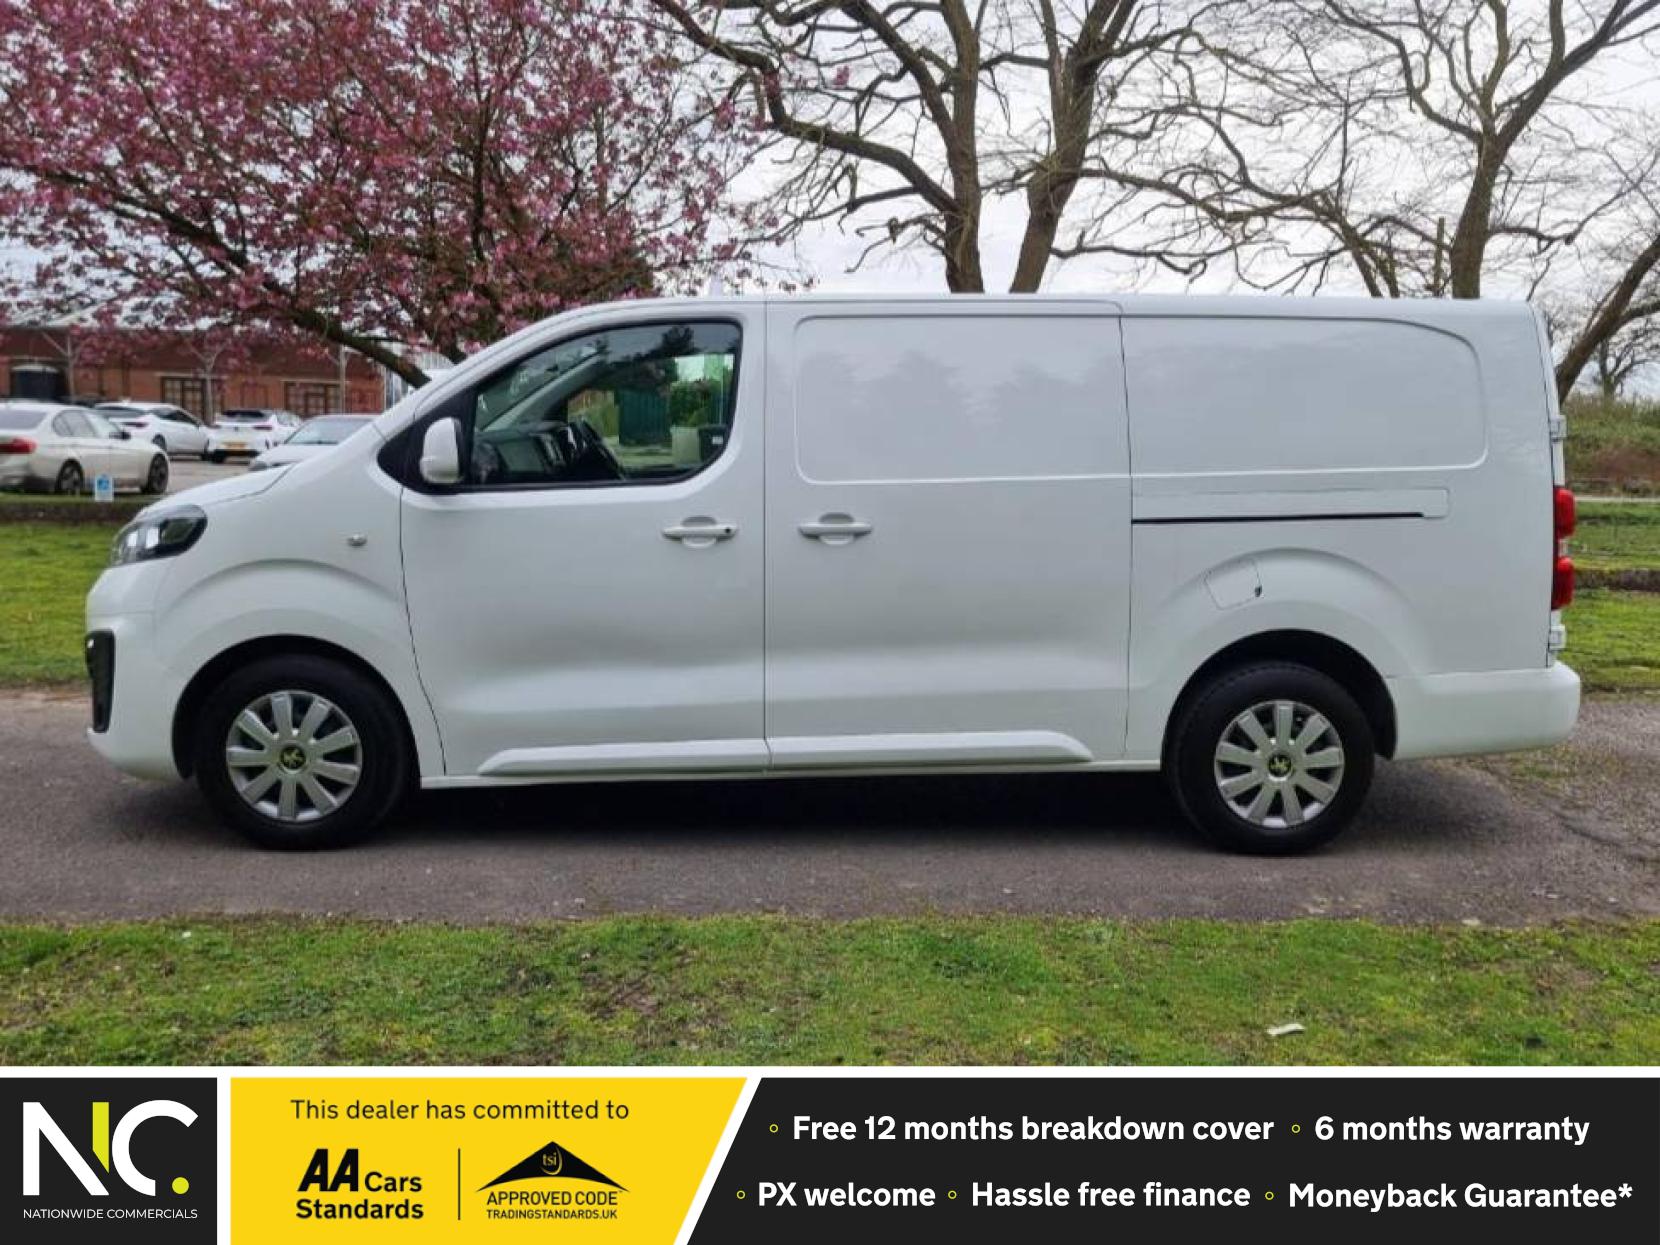 Vauxhall Vivaro 1.5 Turbo D 2900 Sportive Panel Van 5dr L2 H1 (100 ps) Diesel Manual ⭐️ Euro 6 ⭐️  One Owner ⭐️  Finance Available